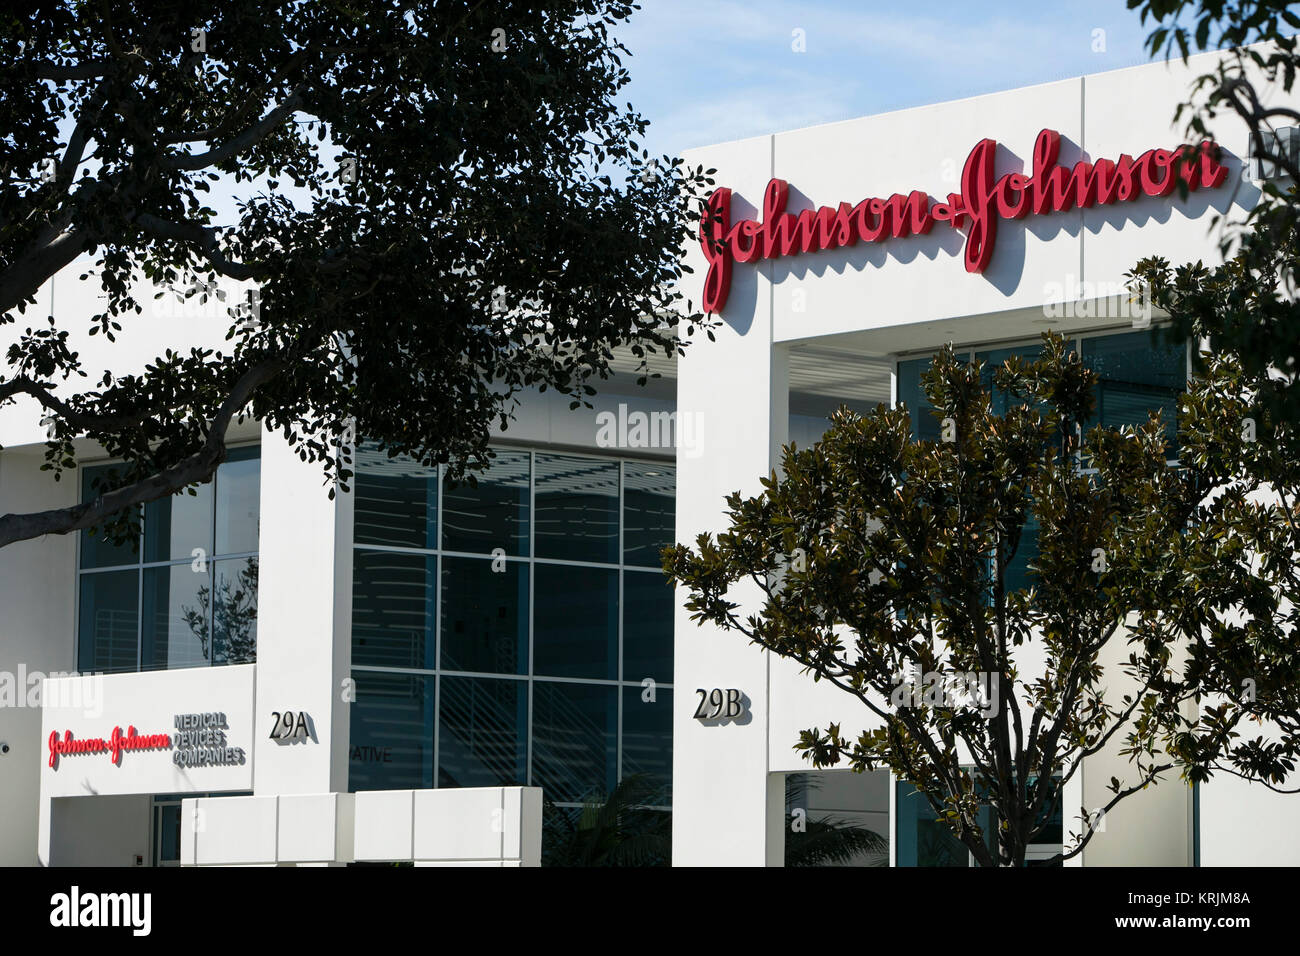 A logo sign outside of a facility occupied by Johnson & Johnson in Irvine, California on December 9, 2017. Stock Photo